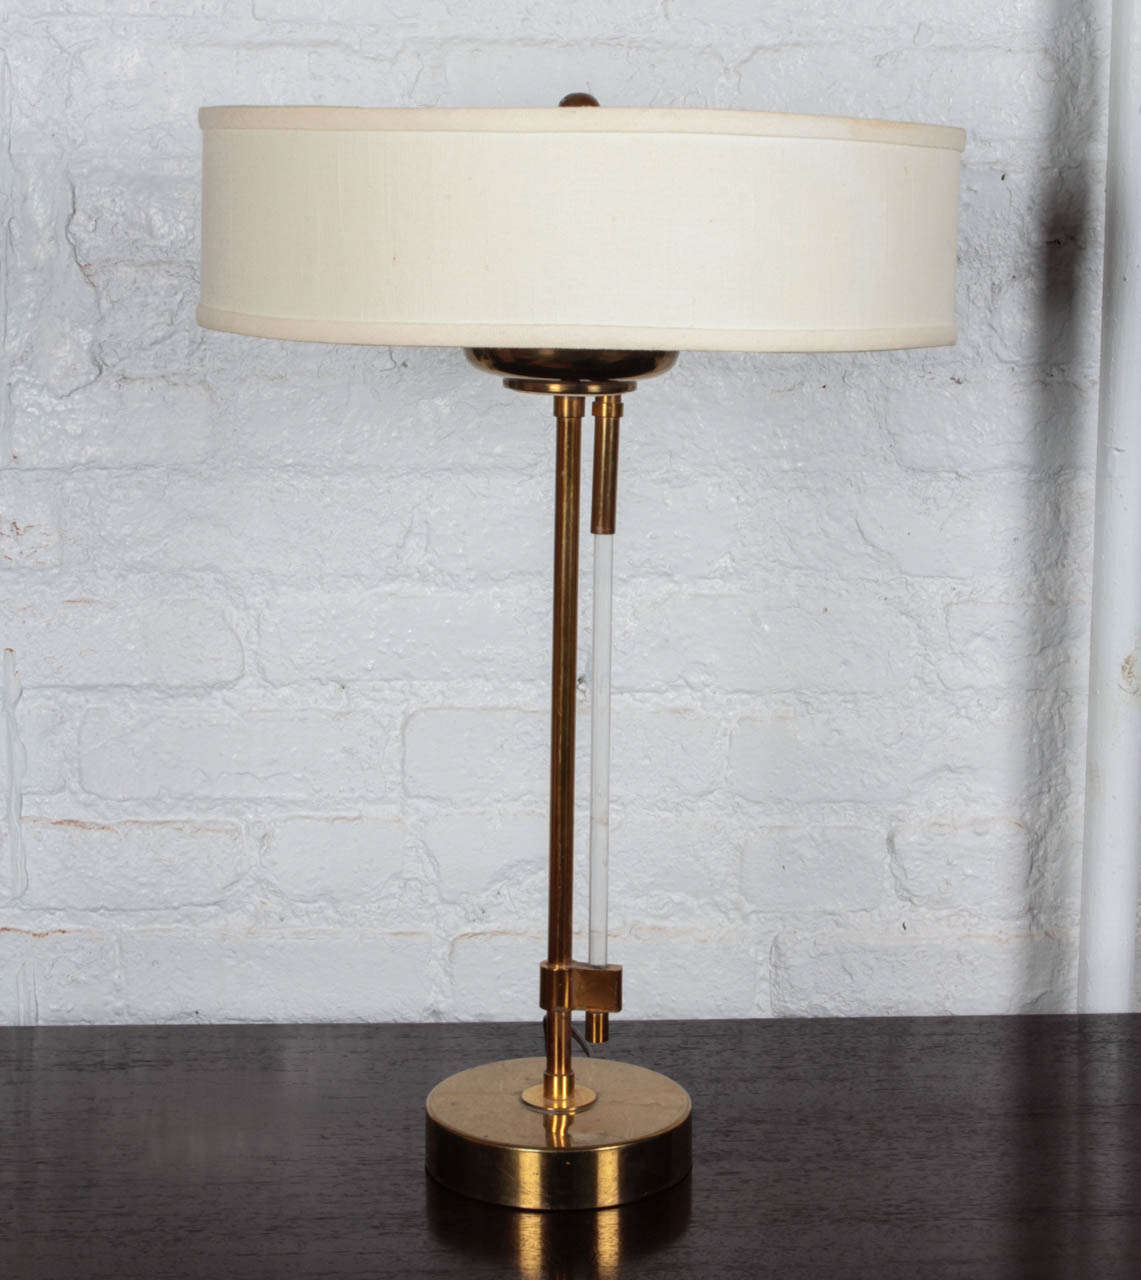 Brass table lamp with brass base and cylindrical lucite switch which pulls down to turn on and off, mfg. Stiffel.